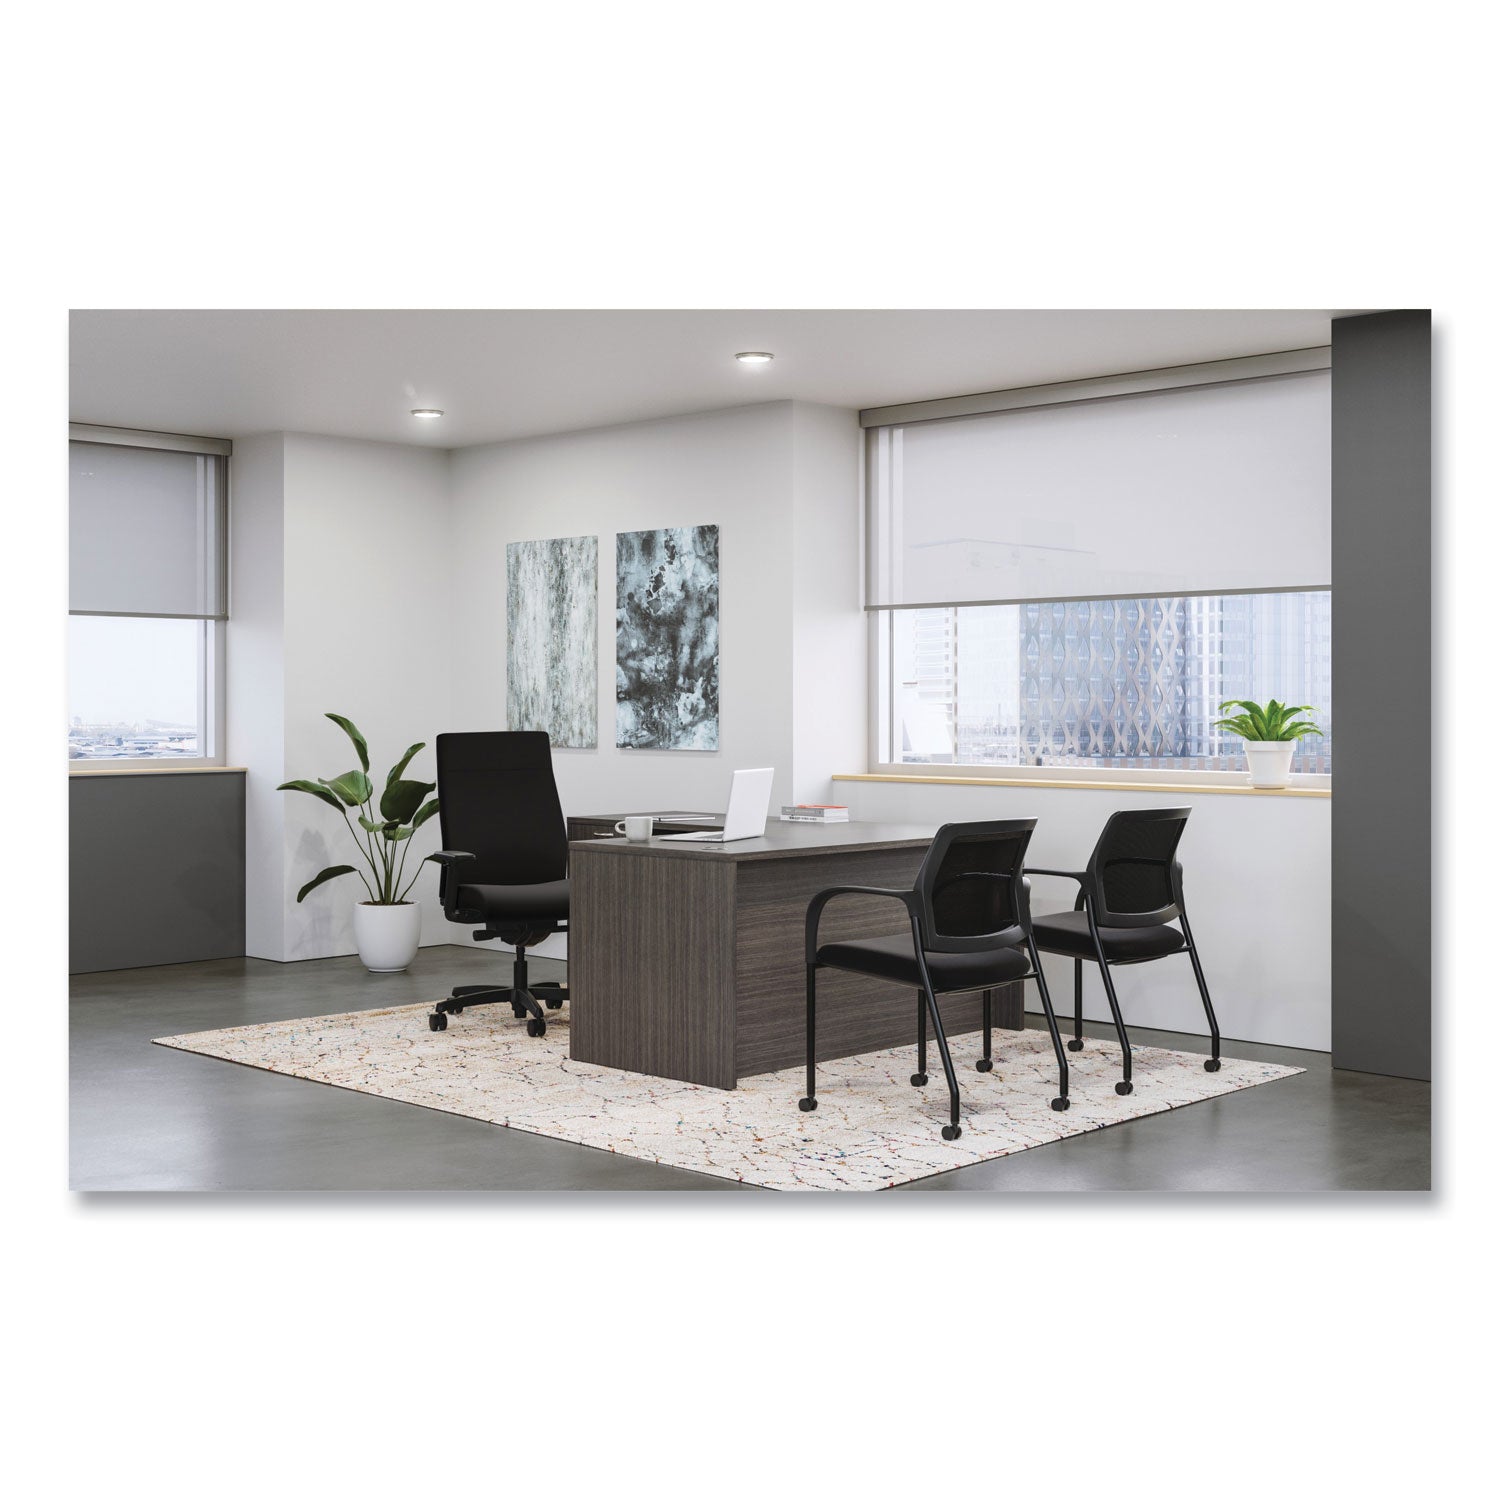 ignition-20-upholstered-mid-back-task-chair-17-to-215-seat-height-black-fabric-seat-back-ships-in-7-10-business-days_honi2u2ahcu10tk - 3